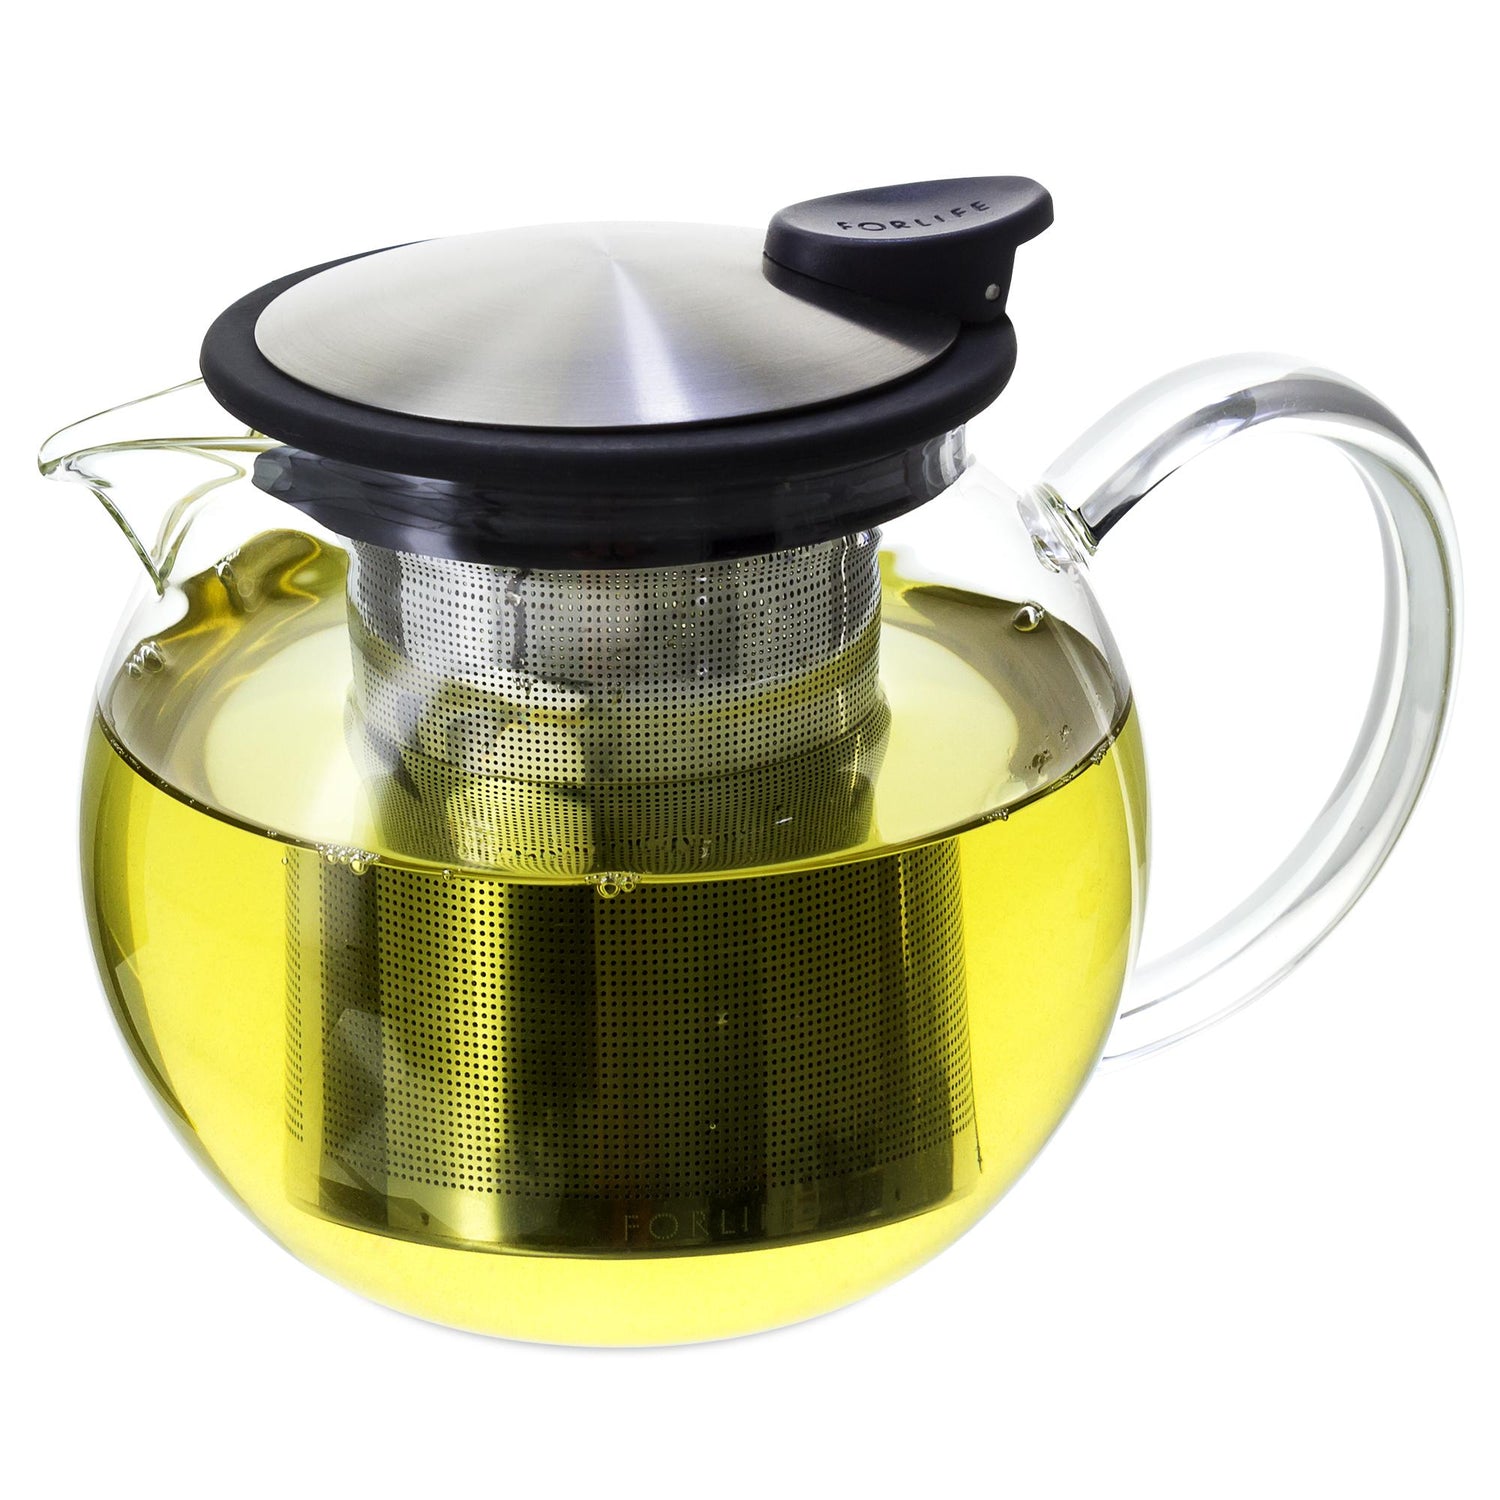 25oz Tempered Glass Tea Pot Infuser with Stainless Steel Basket - Dragonfly  Tea Zone